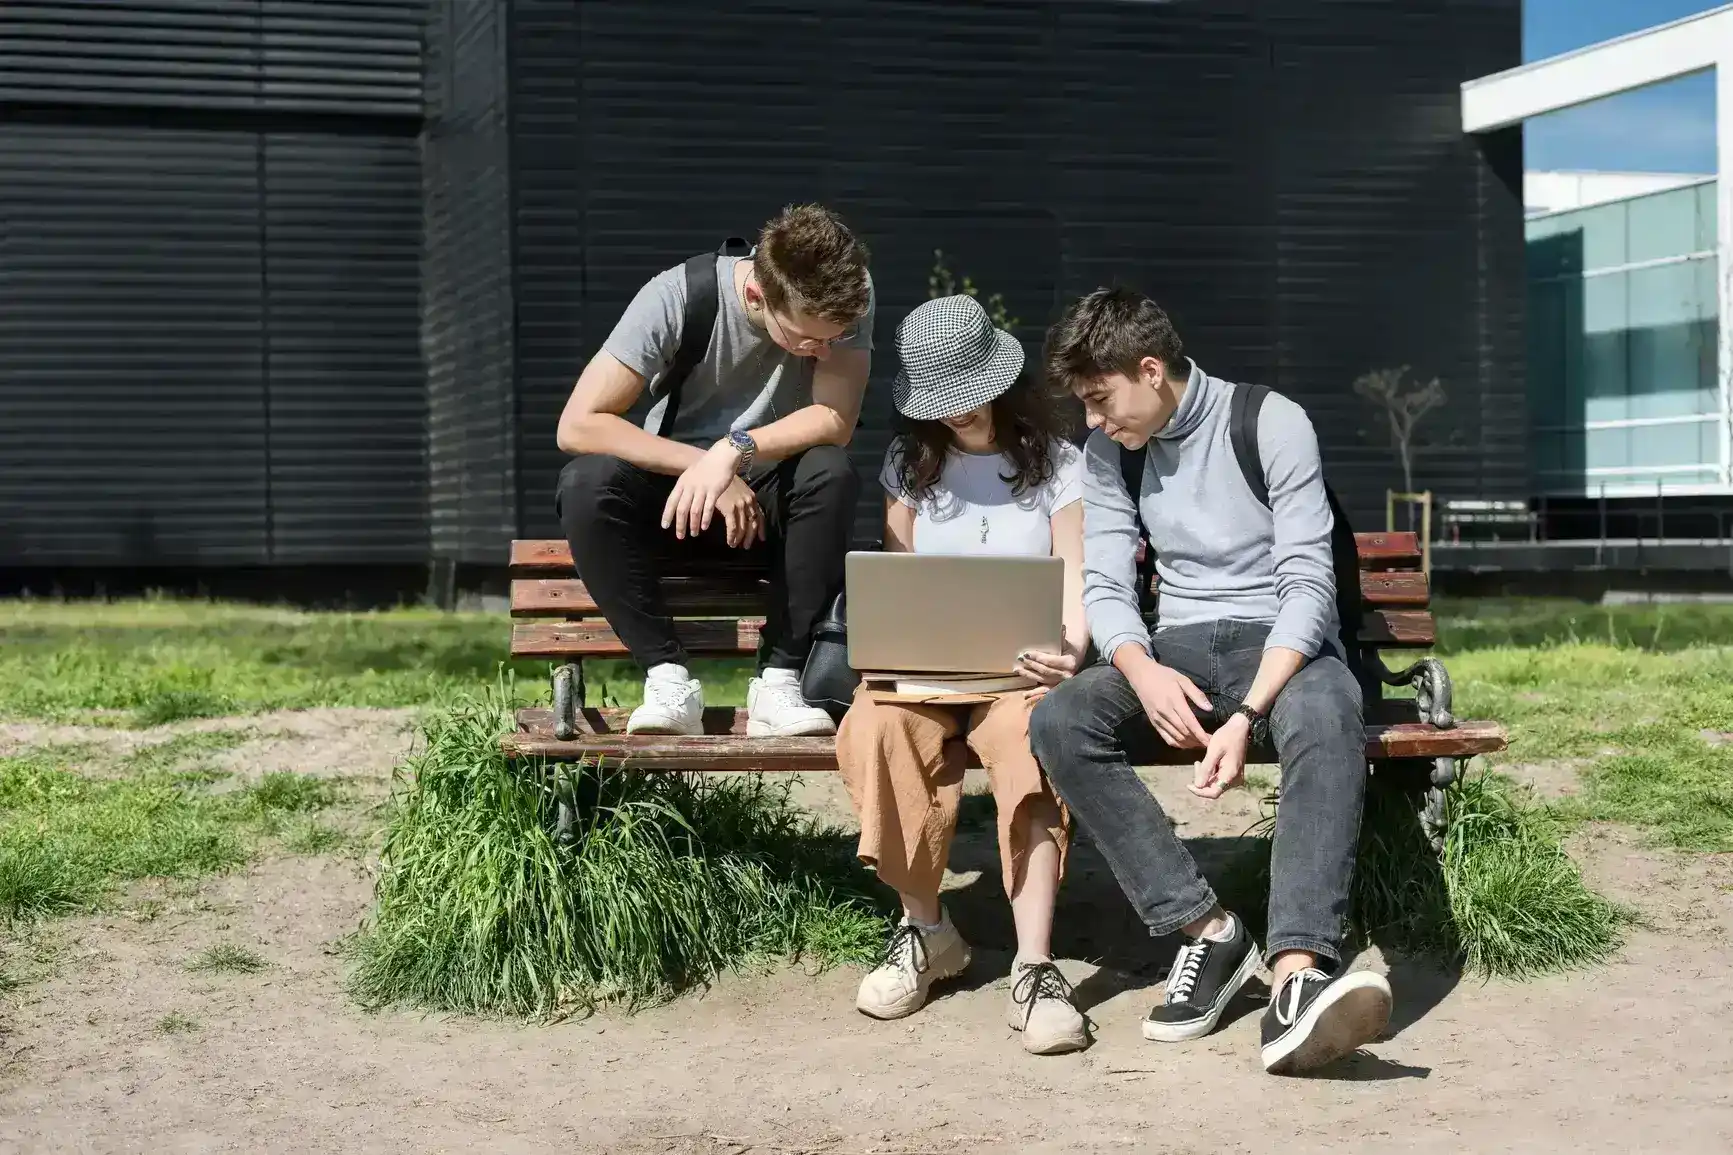 Three people sit on a bench and look into a laptop together.